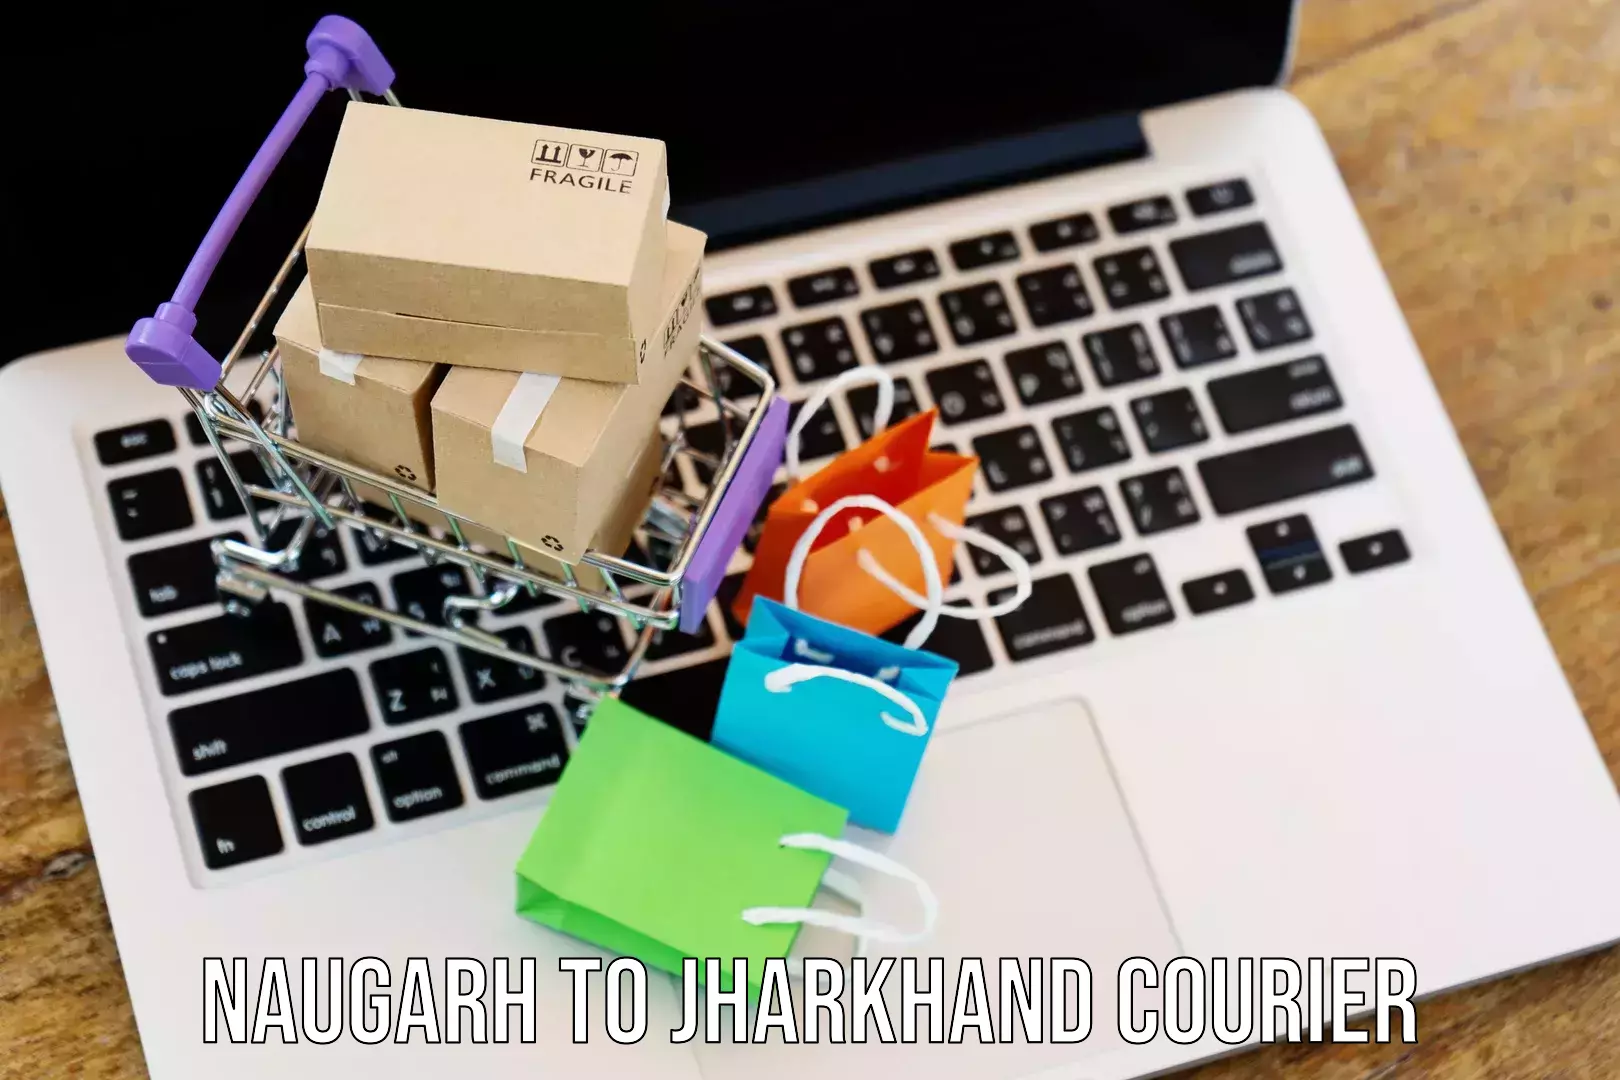 Customizable shipping options in Naugarh to Jharkhand